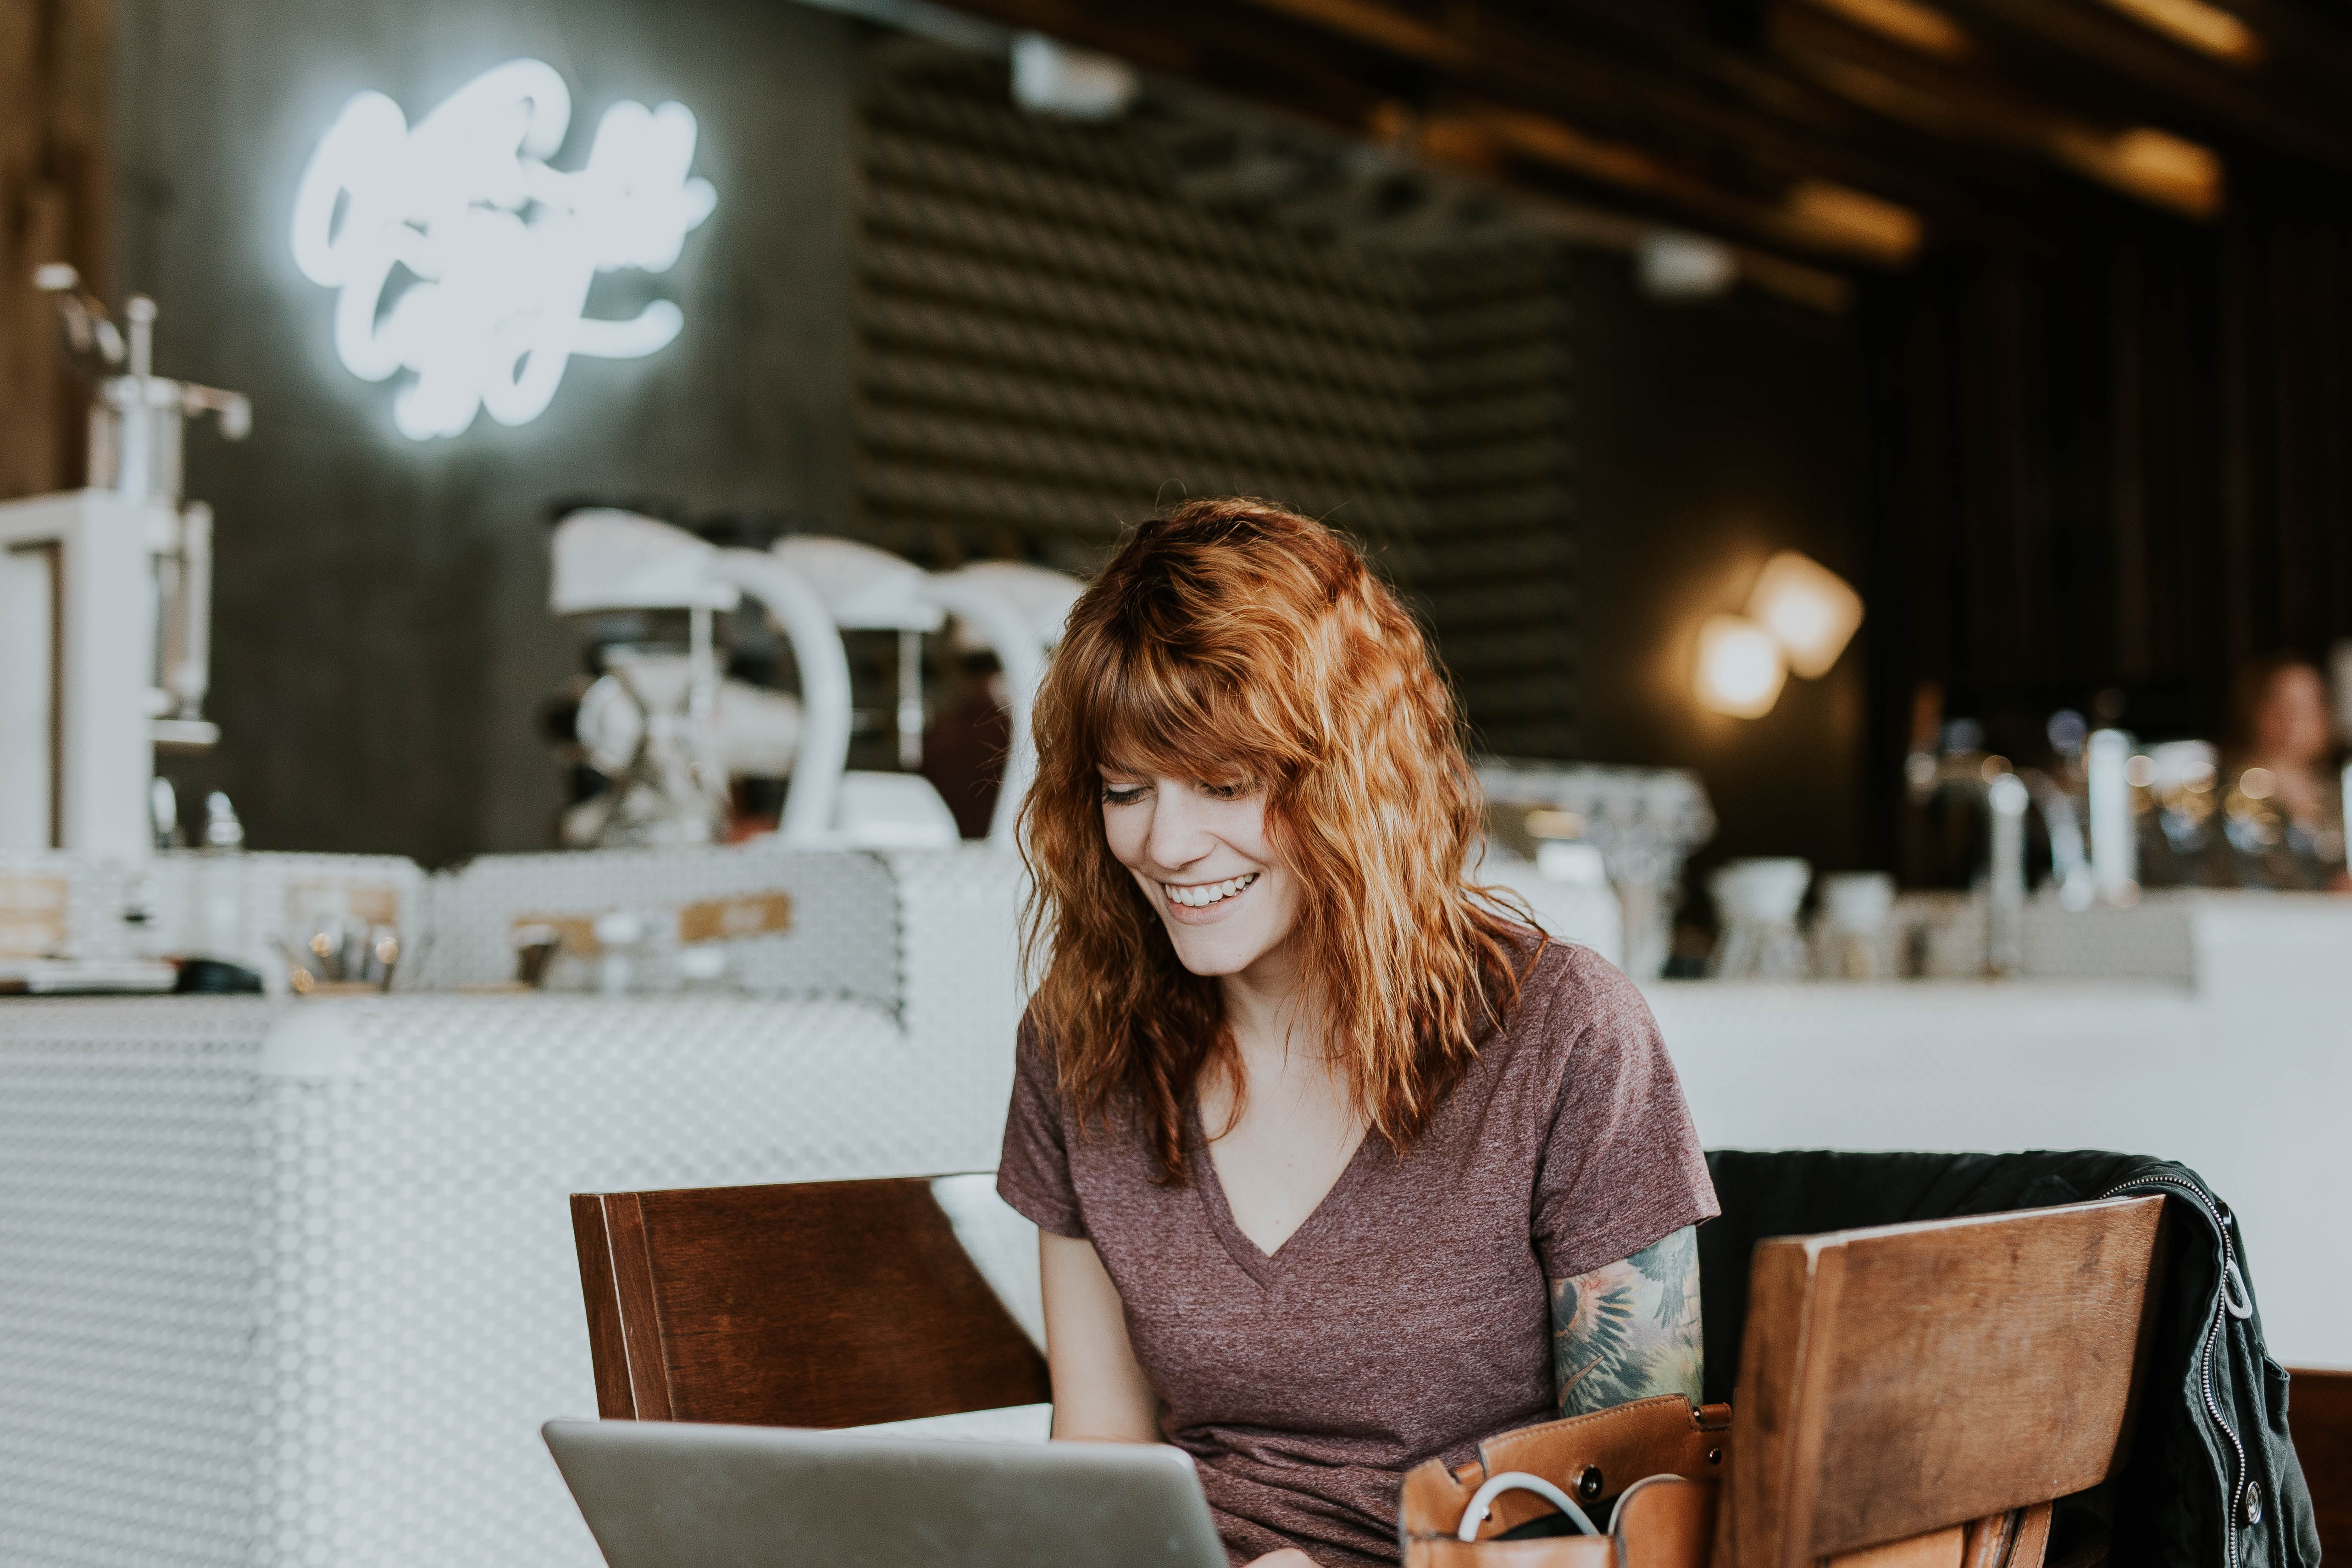 A woman with red hair works on a laptop in a space that looks like a coffee shop